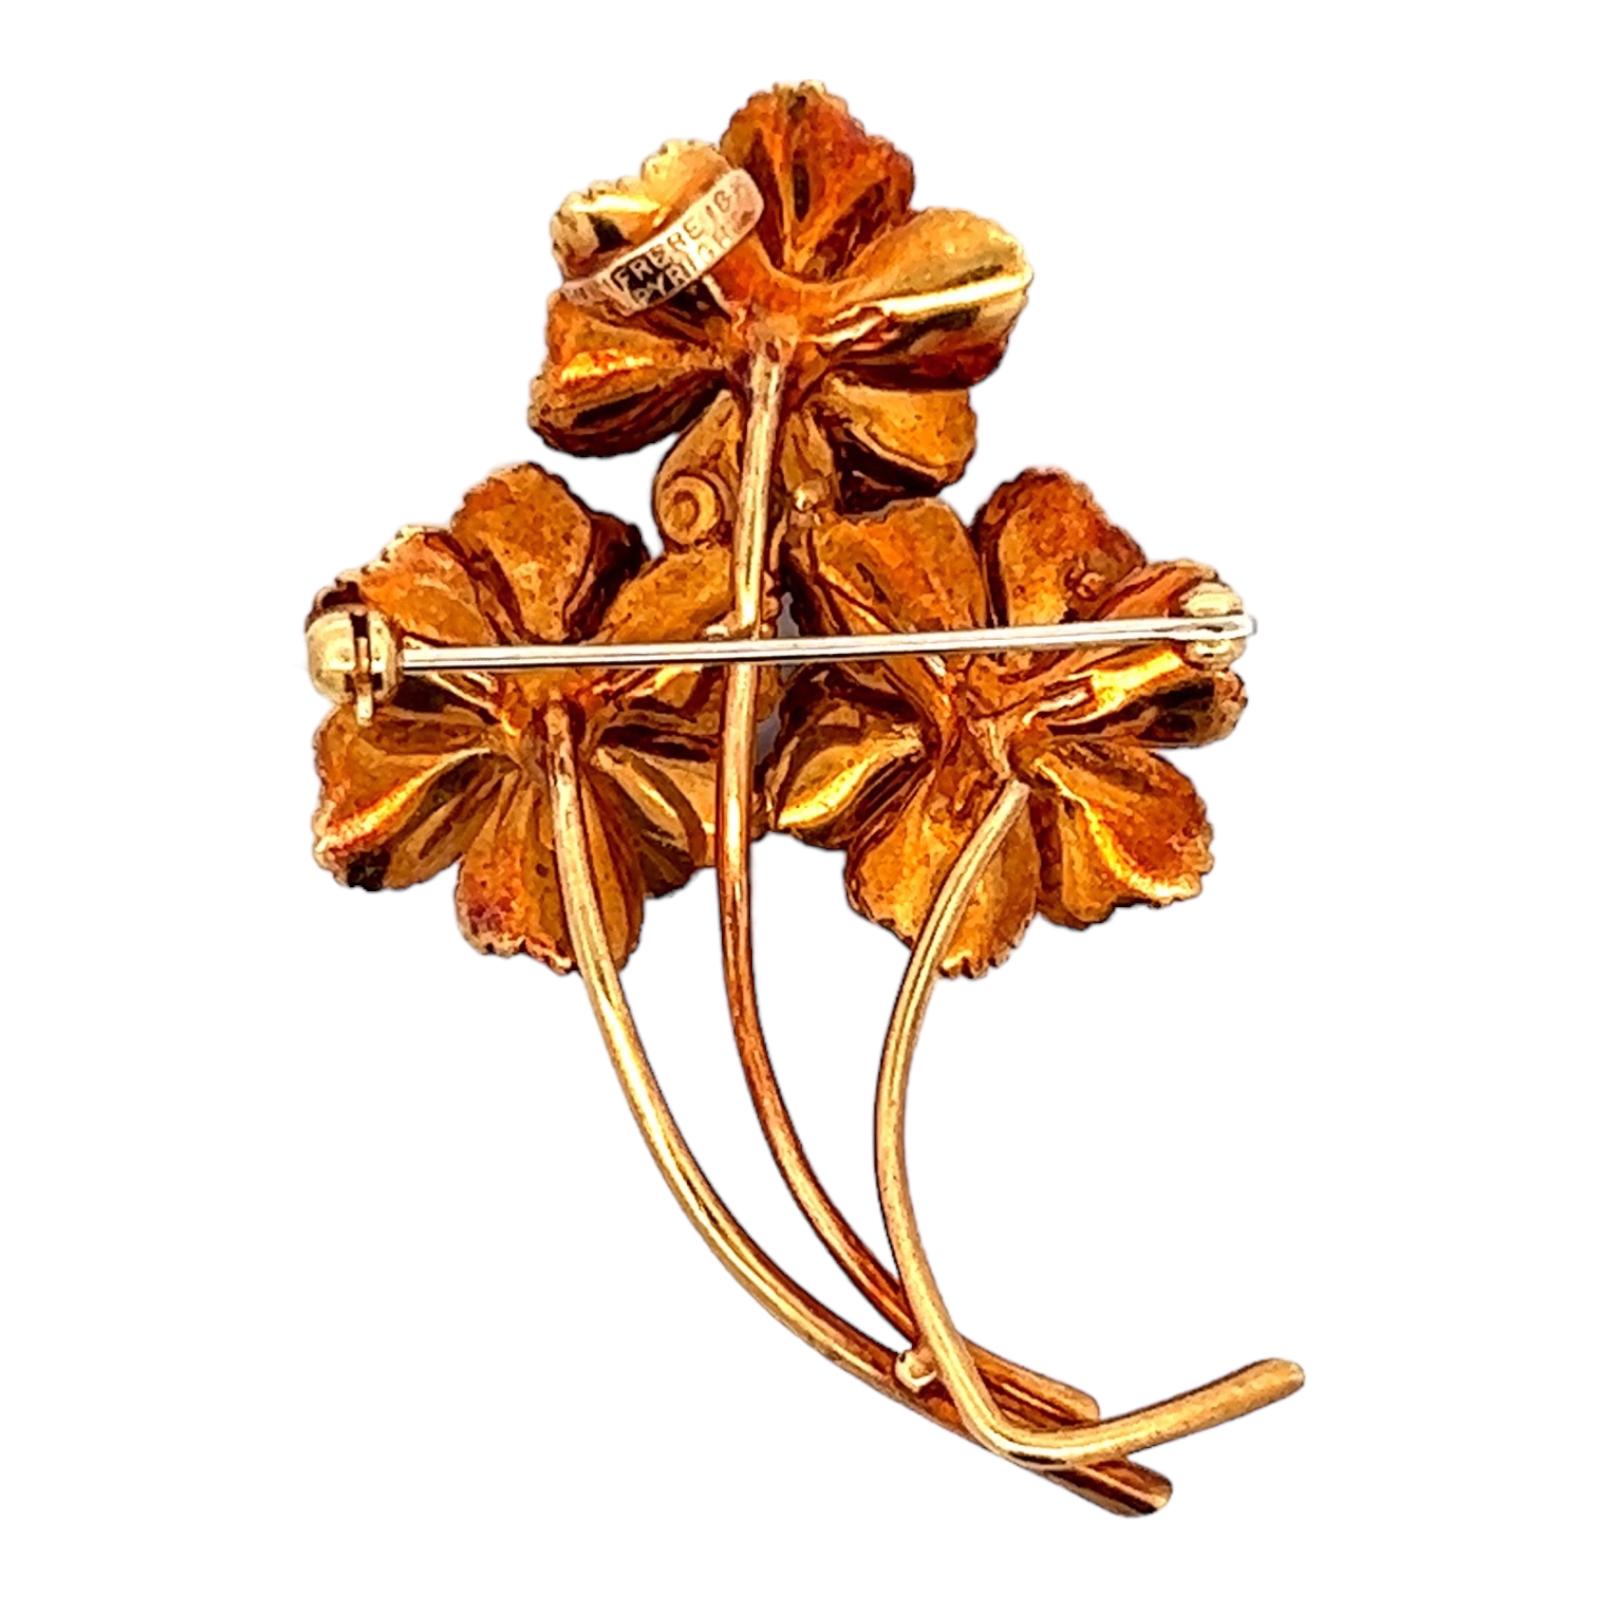 Beautifully crafted floral pin fashioned in 18 karat yellow gold. The brooch features 3 round brilliant cut diamonds weighing approximately .18 CTW. Natual sapphire, ruby, and emerald accents are added for color in the flowers. The brooch measures